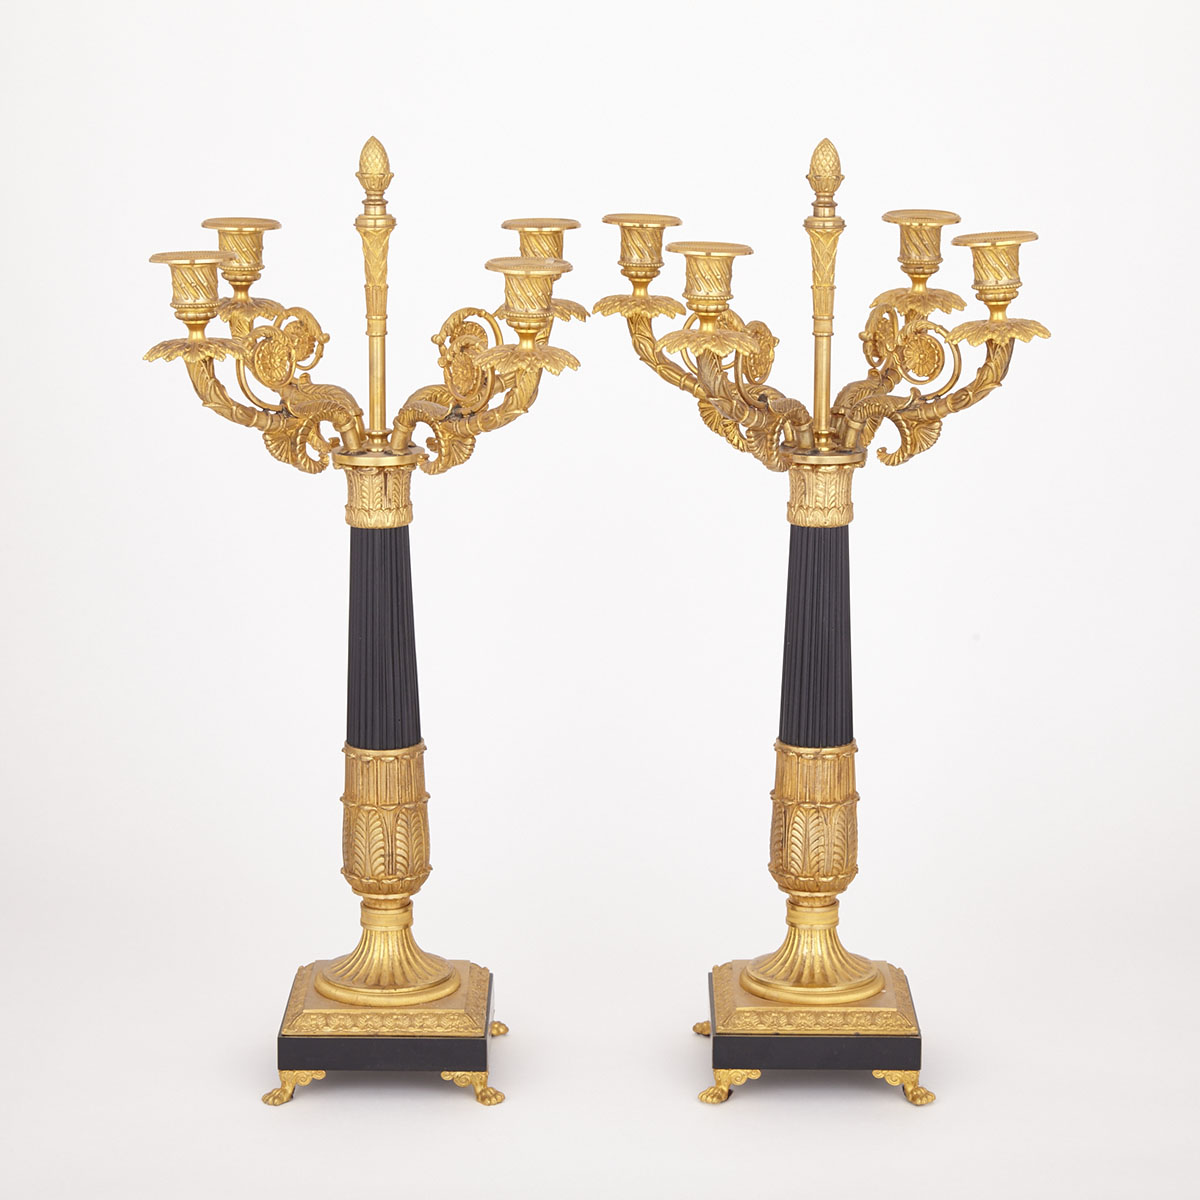 Pair of French Empire Style Gilt and Patinated Bronze Four Light Candelabra, 20th century